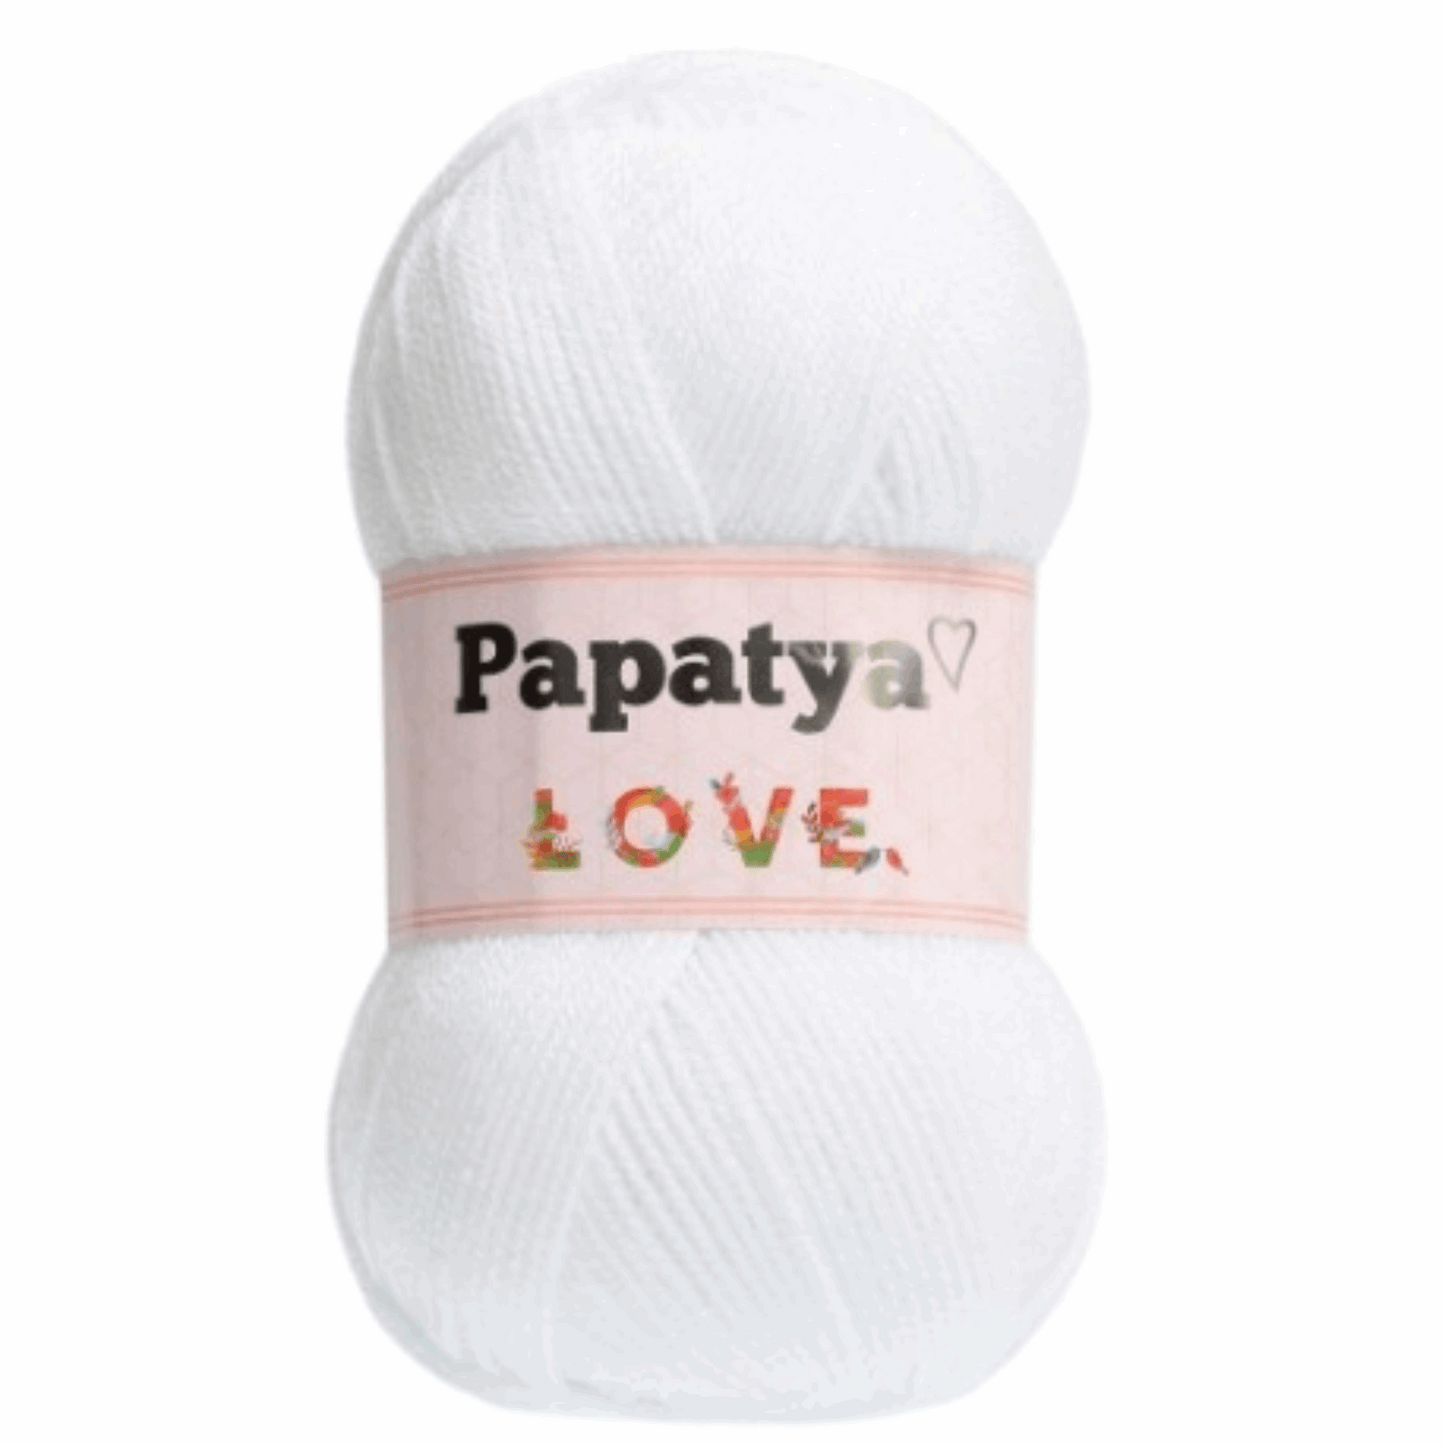 Papatya Love 100g, color white 1000